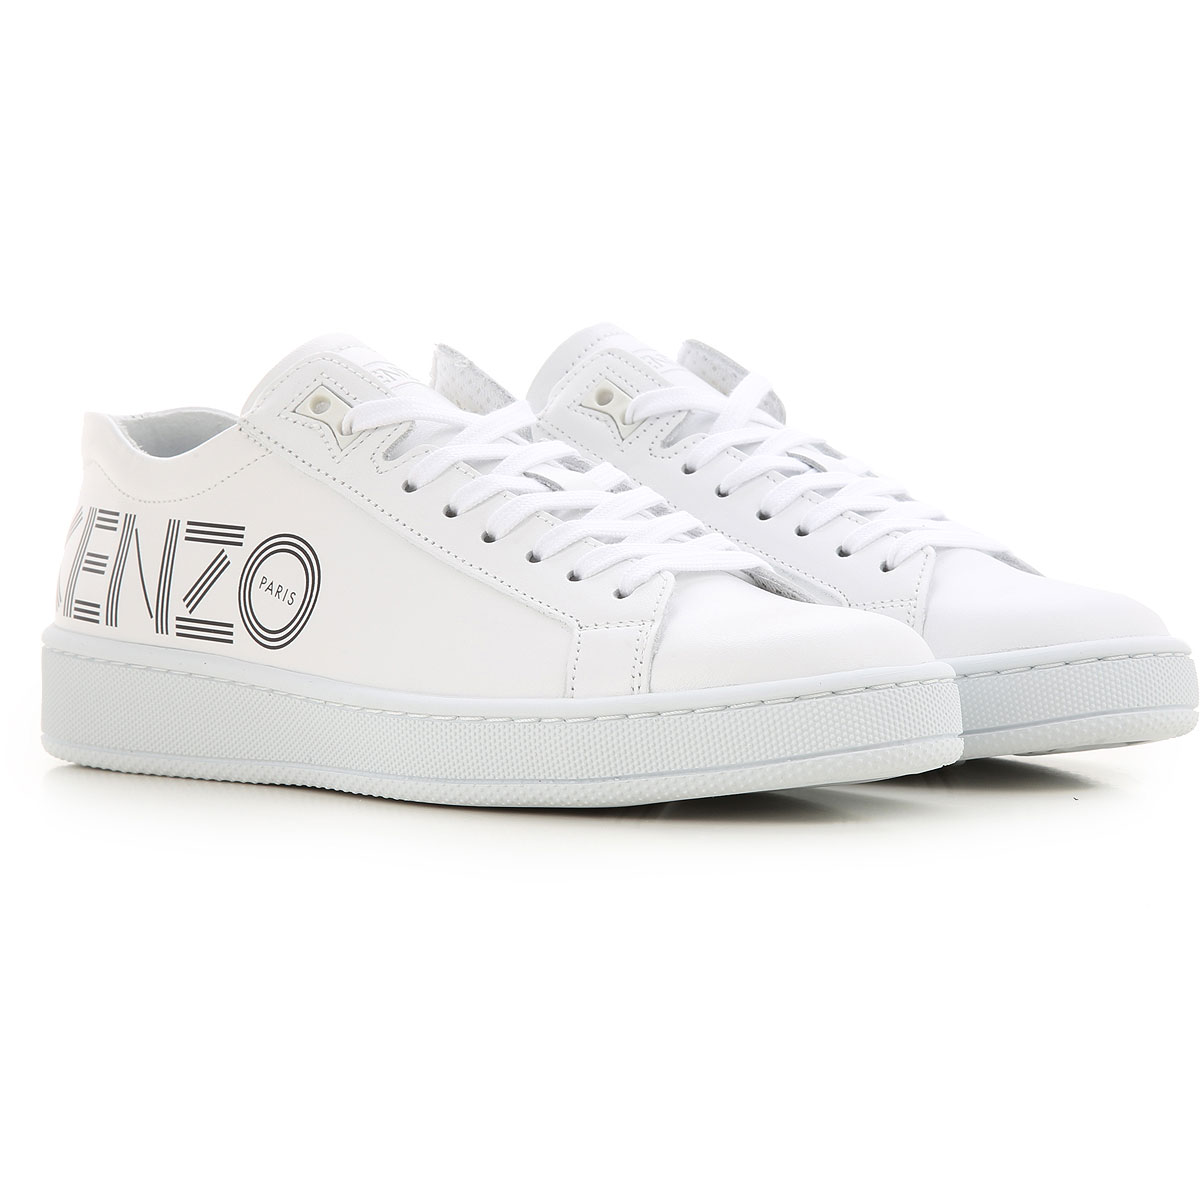 Womens Shoes Kenzo, Style code: 2sn129-l71-01